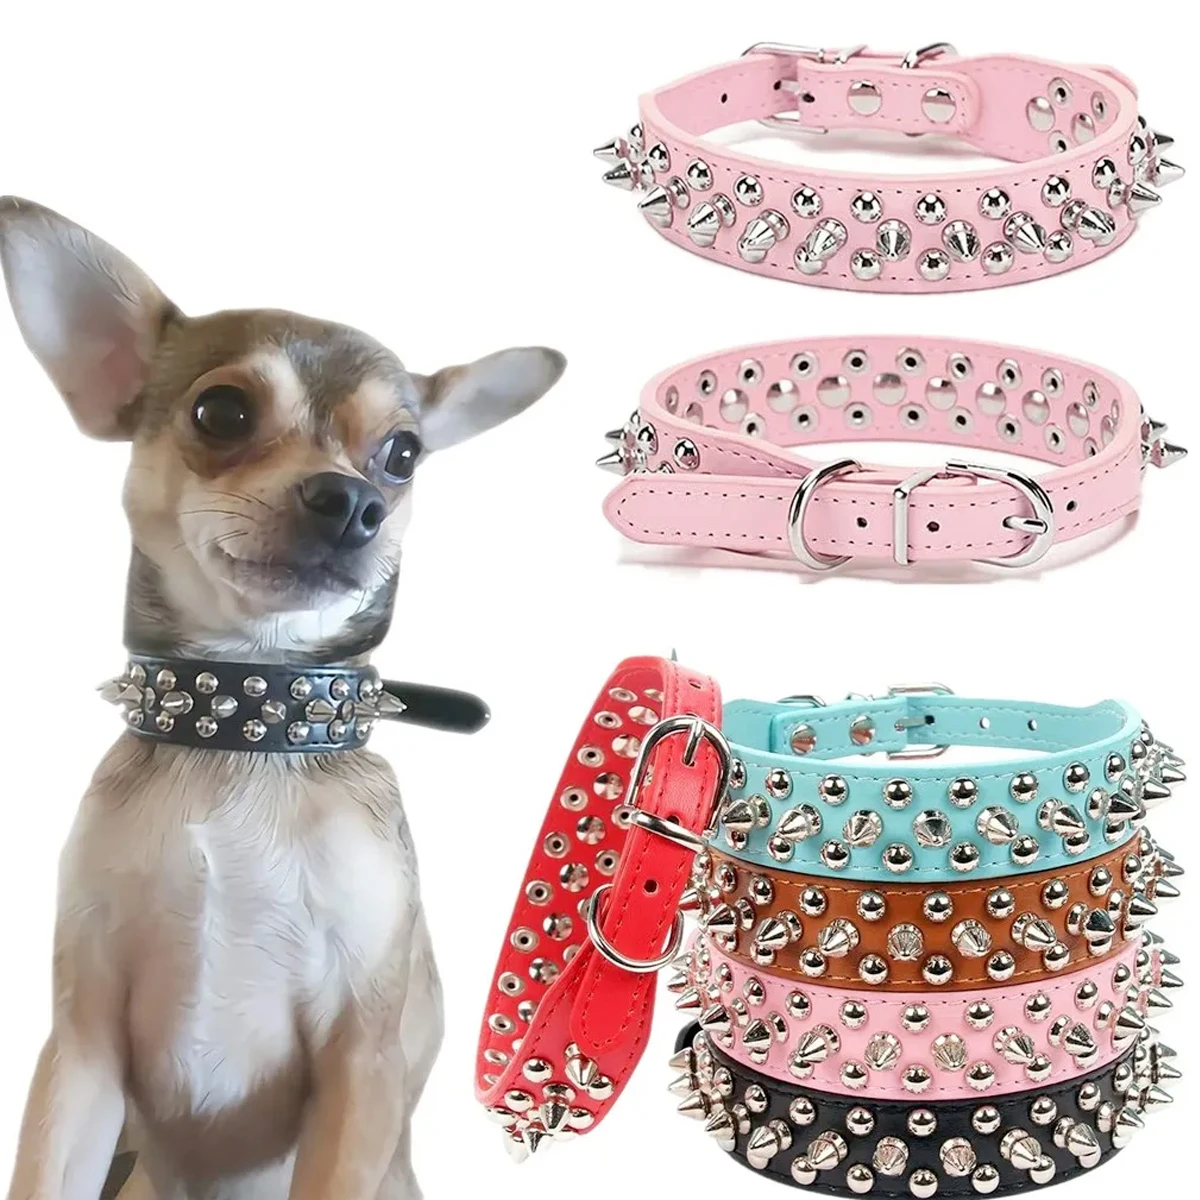 

Adjustable Leather Pet Dog collar Neck Strap Supplies PU Leather Punk Rivet Spiked Dog Collar Pet Collars For Small Dog Cat